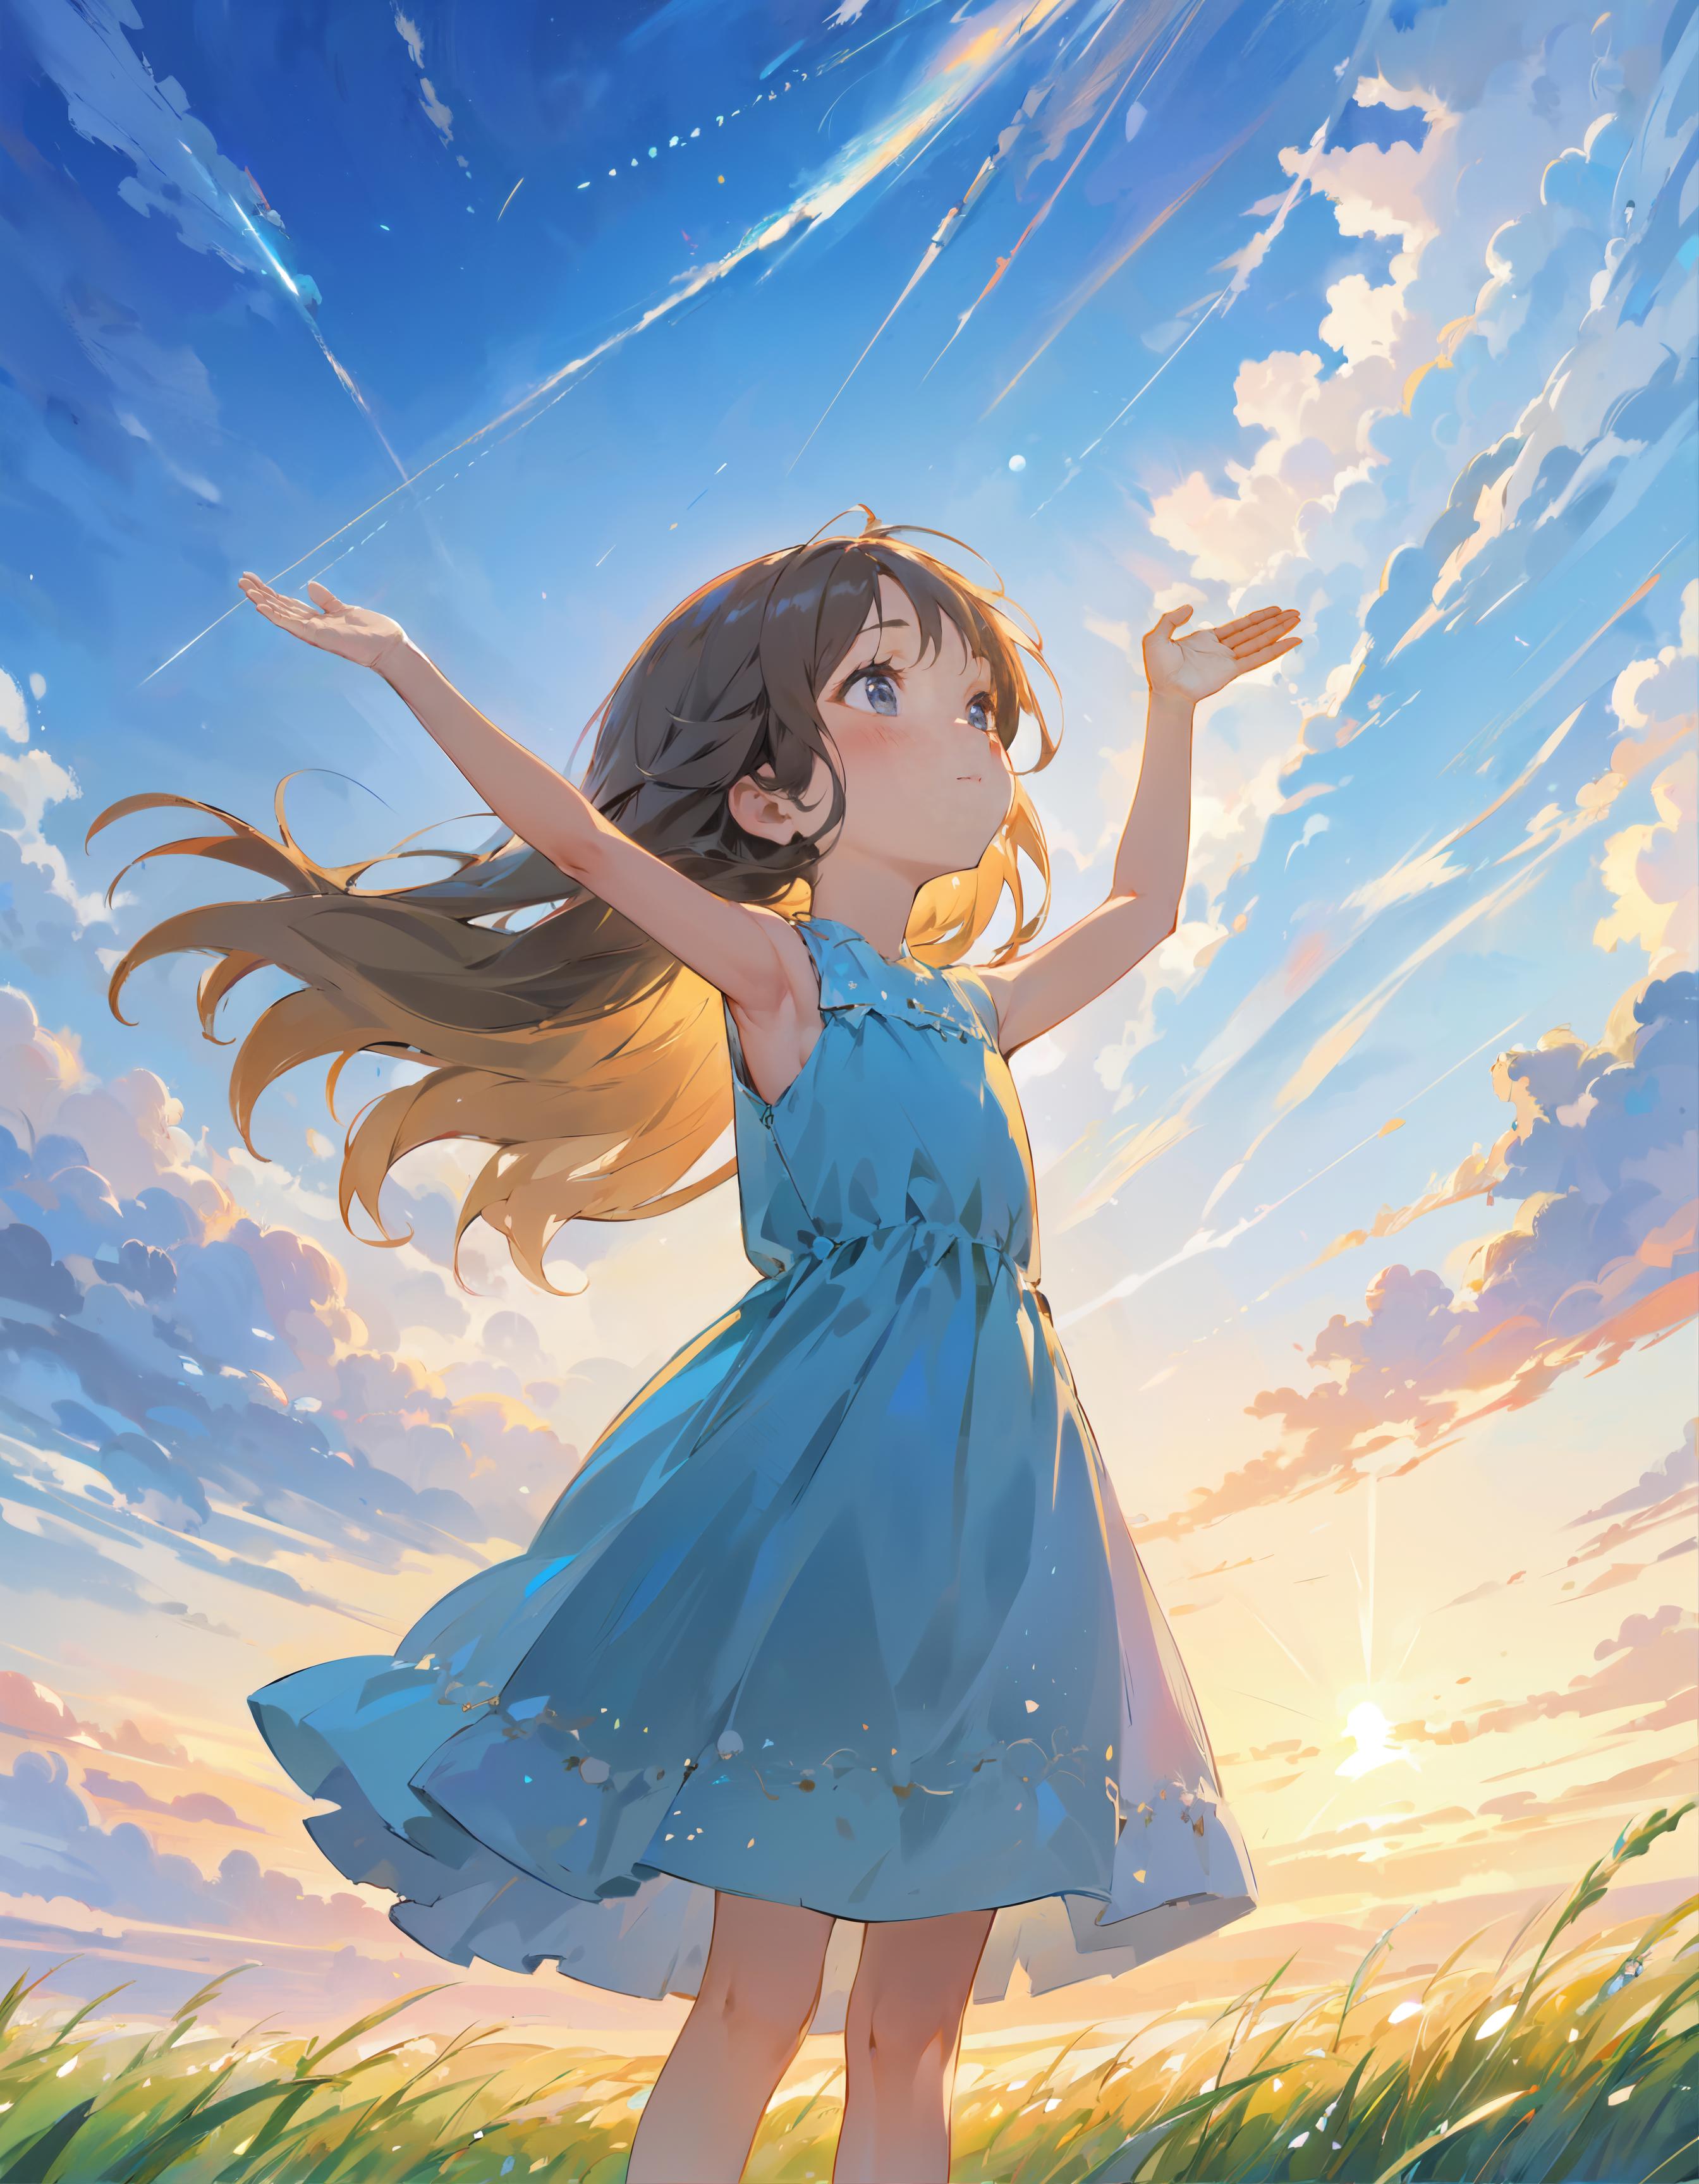 A Little Girl in a Blue Dress Raising Her Hands to the Sky